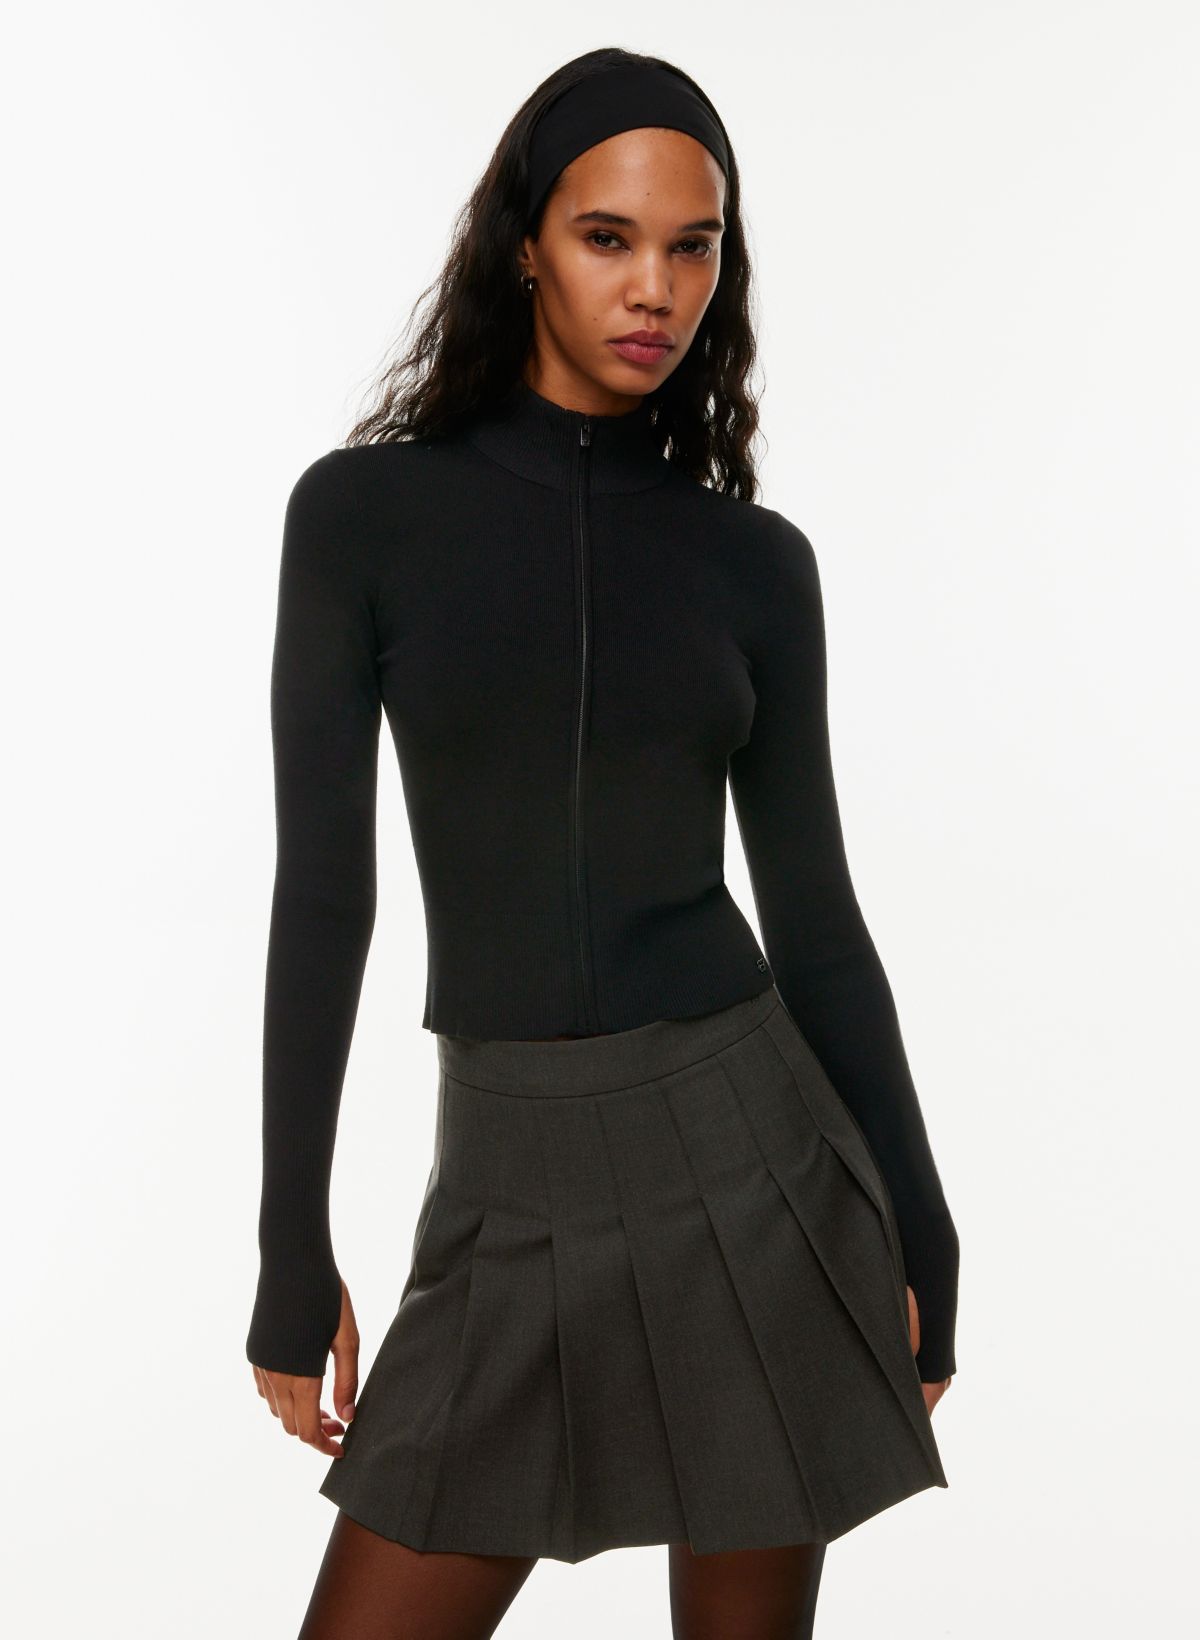 Black Structured Snatched Ribbed Zip Front Short Sleeve Bodysuit